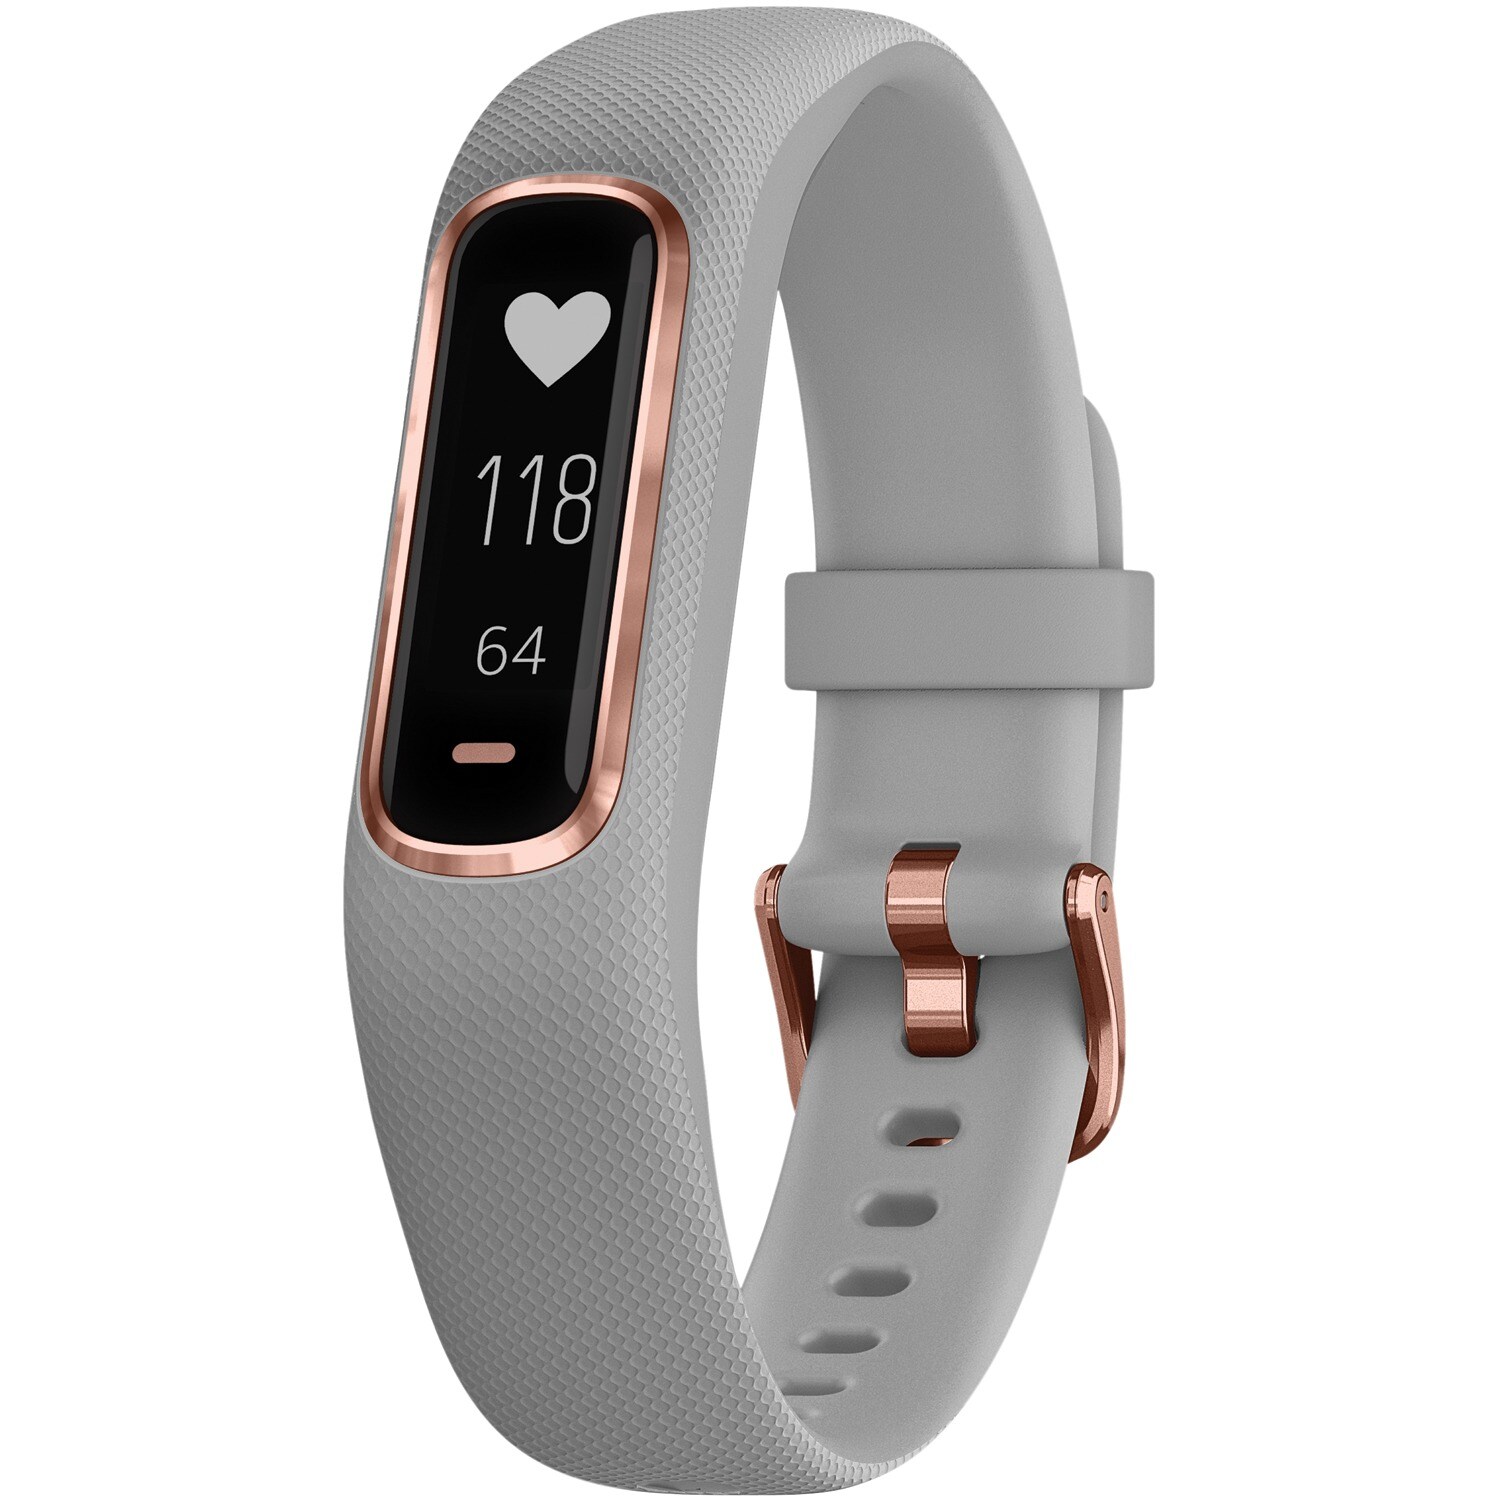 Step Vivosmart Enabled with Tracker Counter, at Heart and Monitor Fitness Rate Gps 4 Garmin